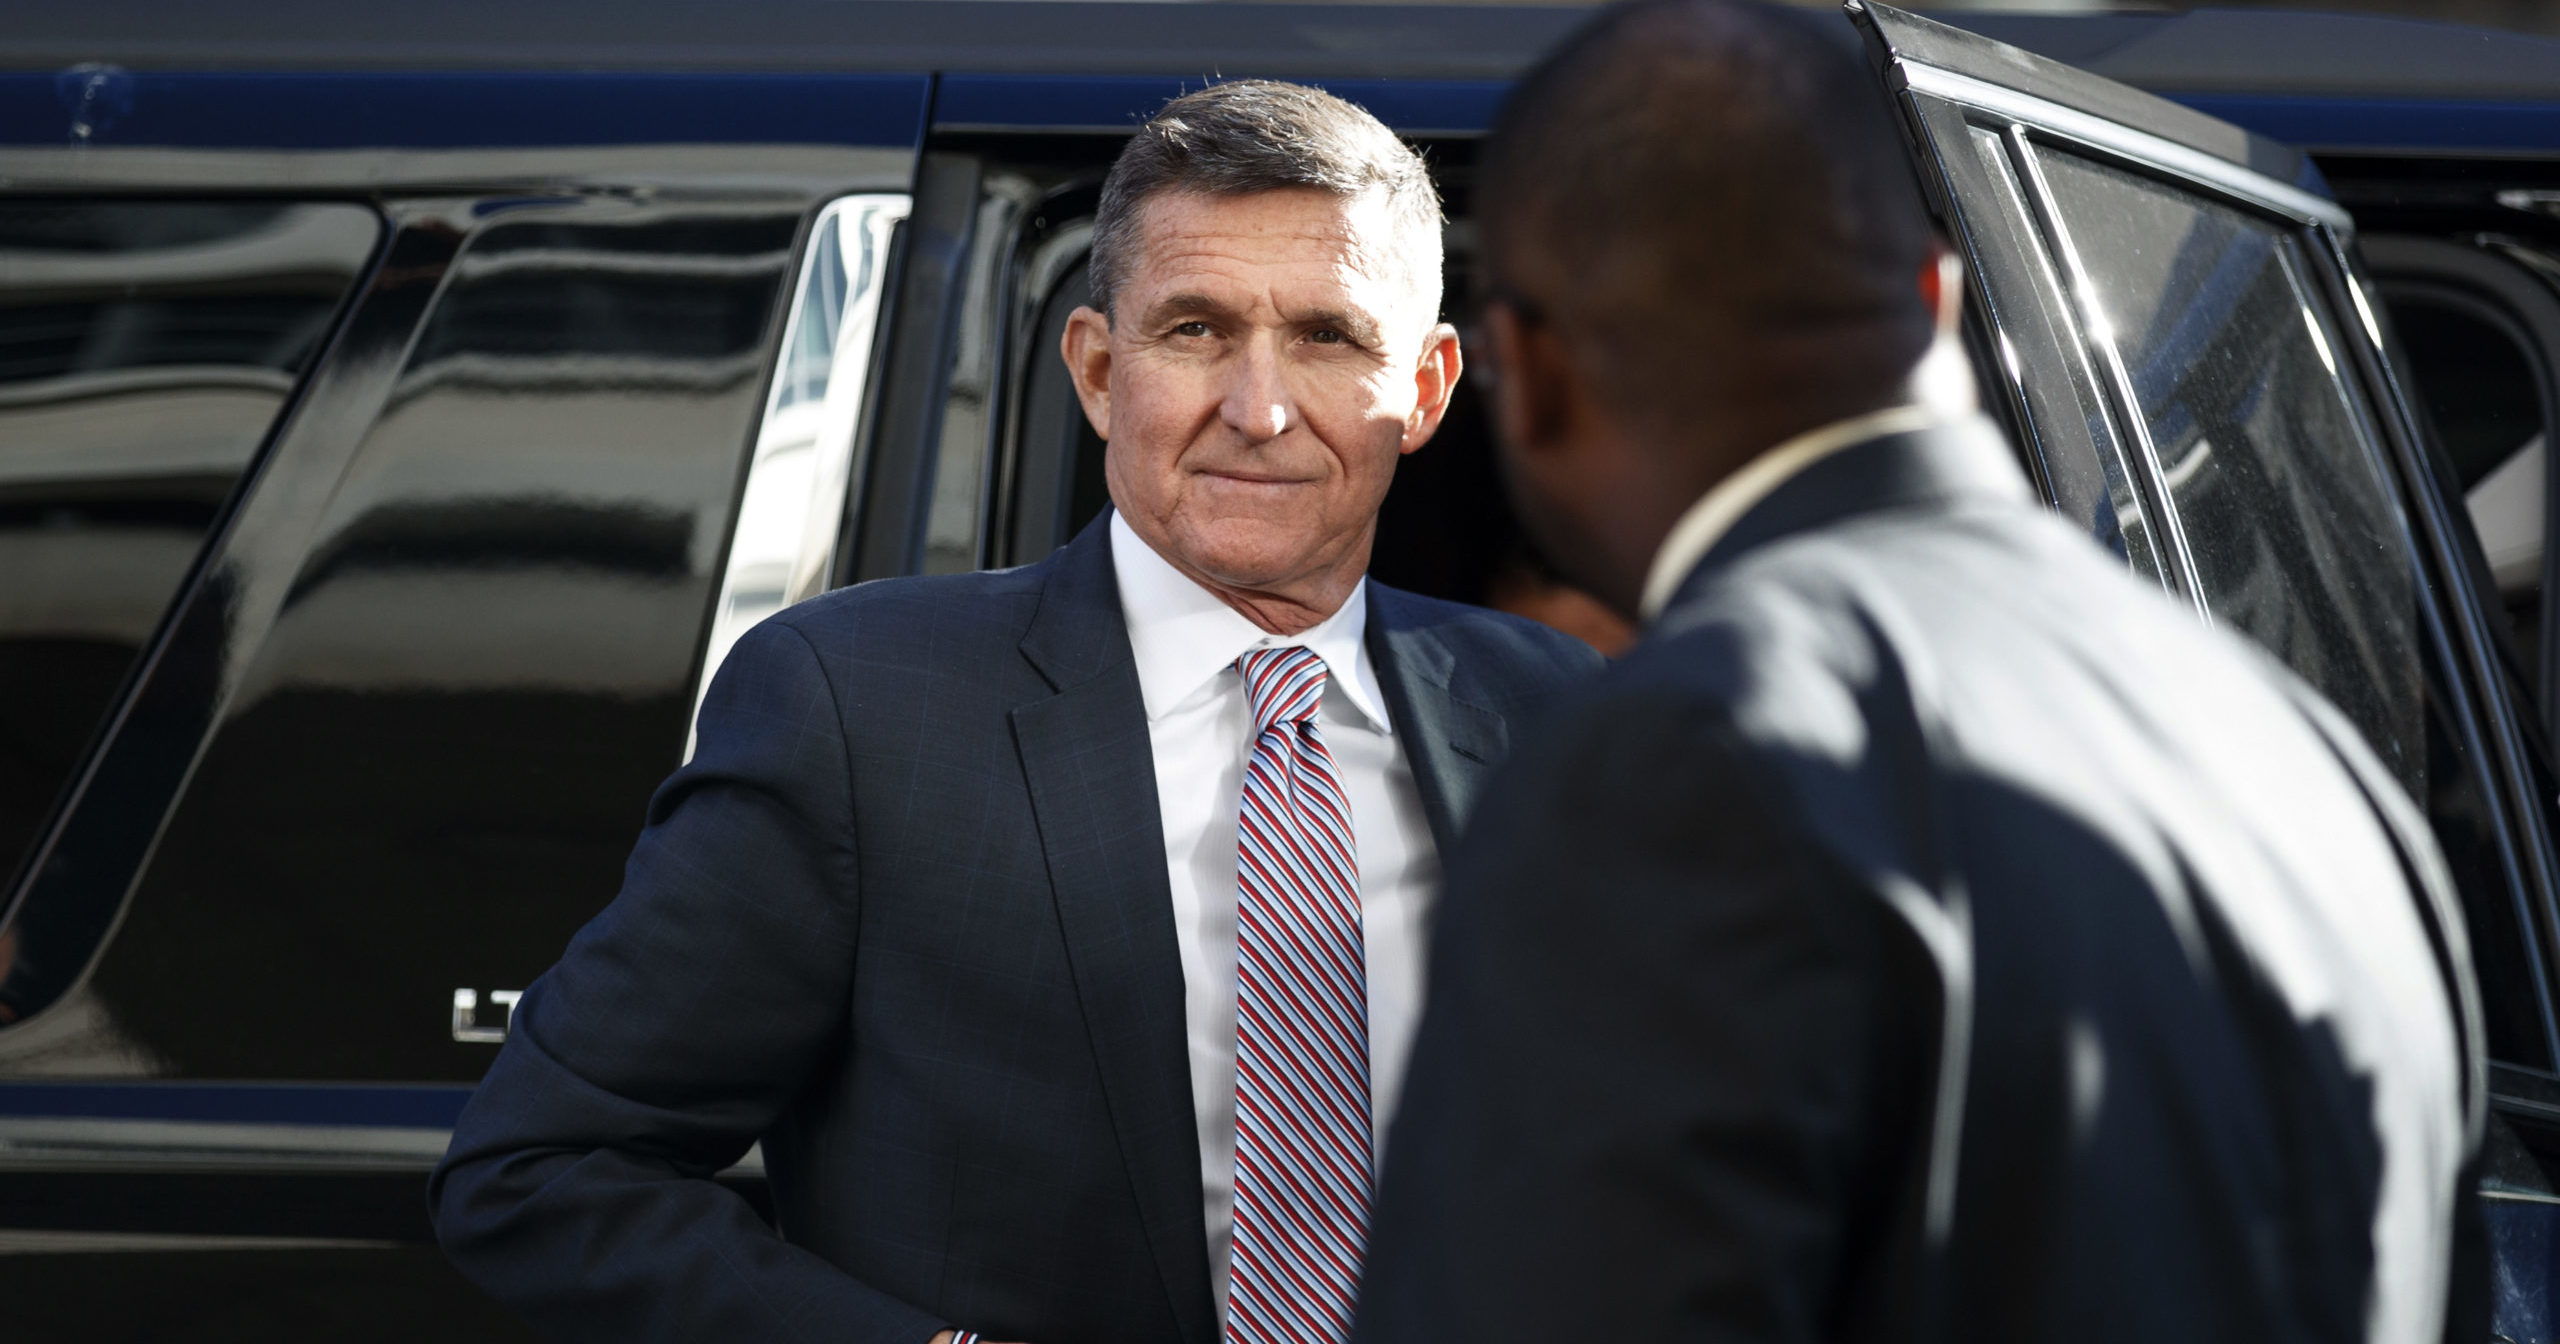 In this Dec. 18, 2018, file photo, President Donald Trump's former national security advisor, Michael Flynn, arrives at federal court in Washington.